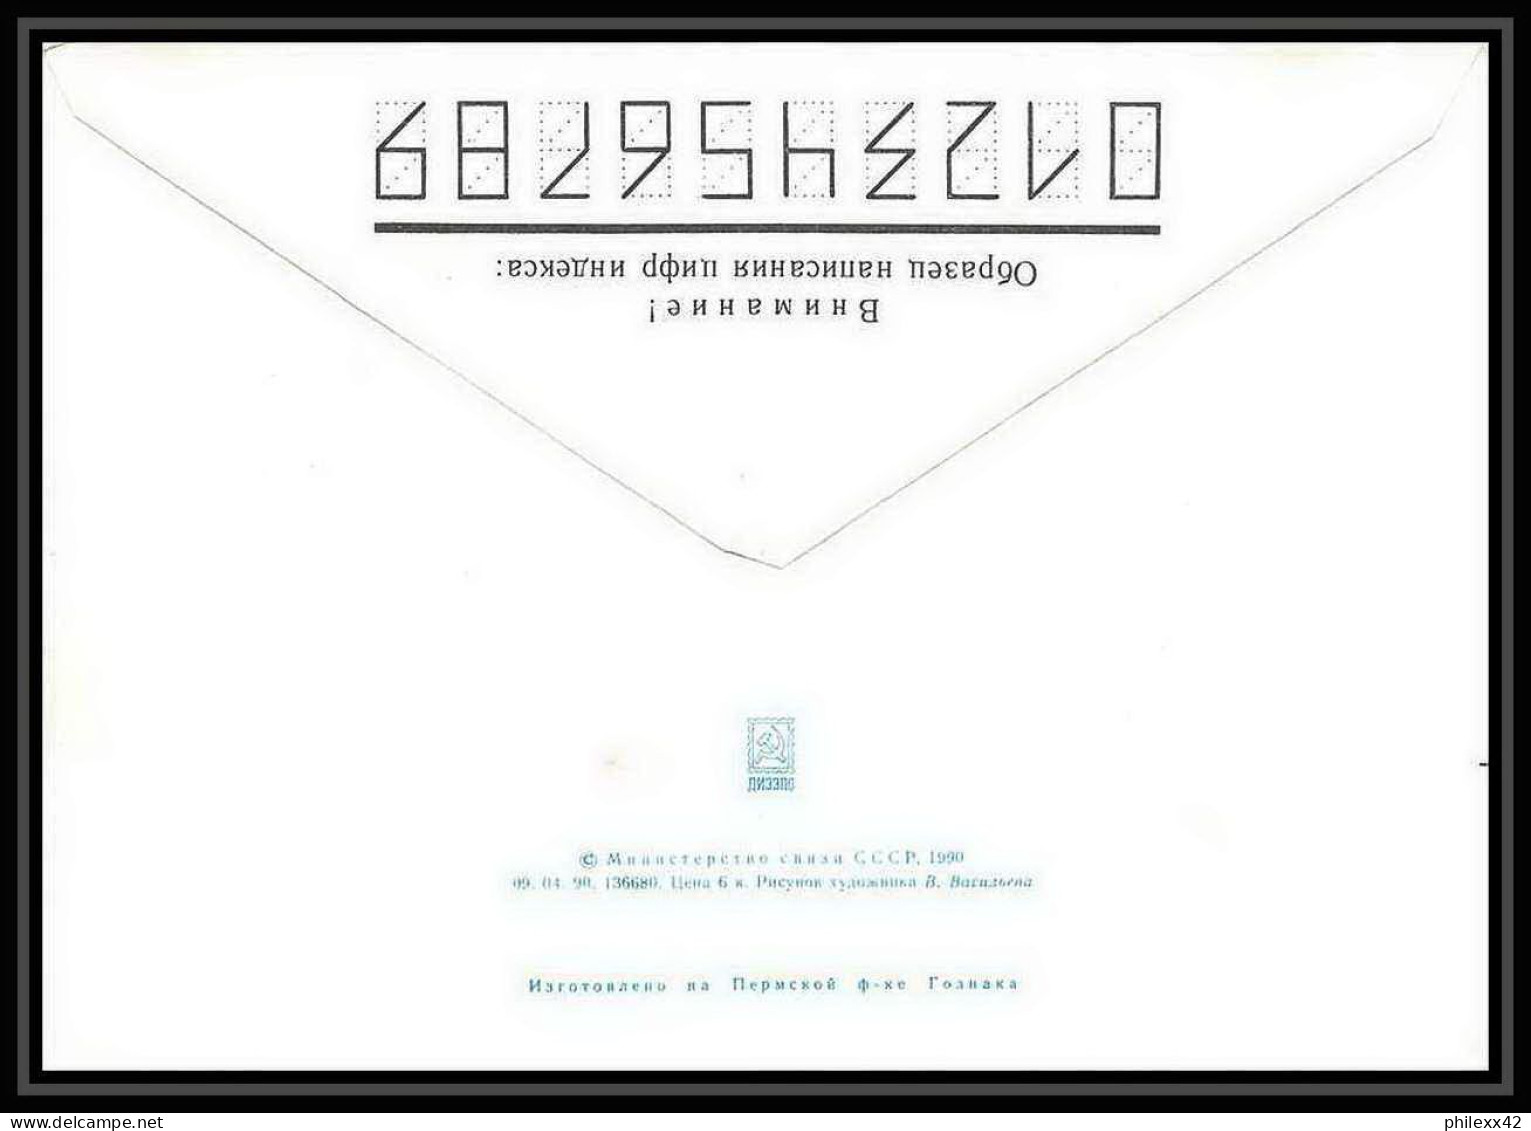 10011/ Espace (space) Entier Postal (Stamped Stationery) 23/9/1990 (urss USSR) - Rusia & URSS